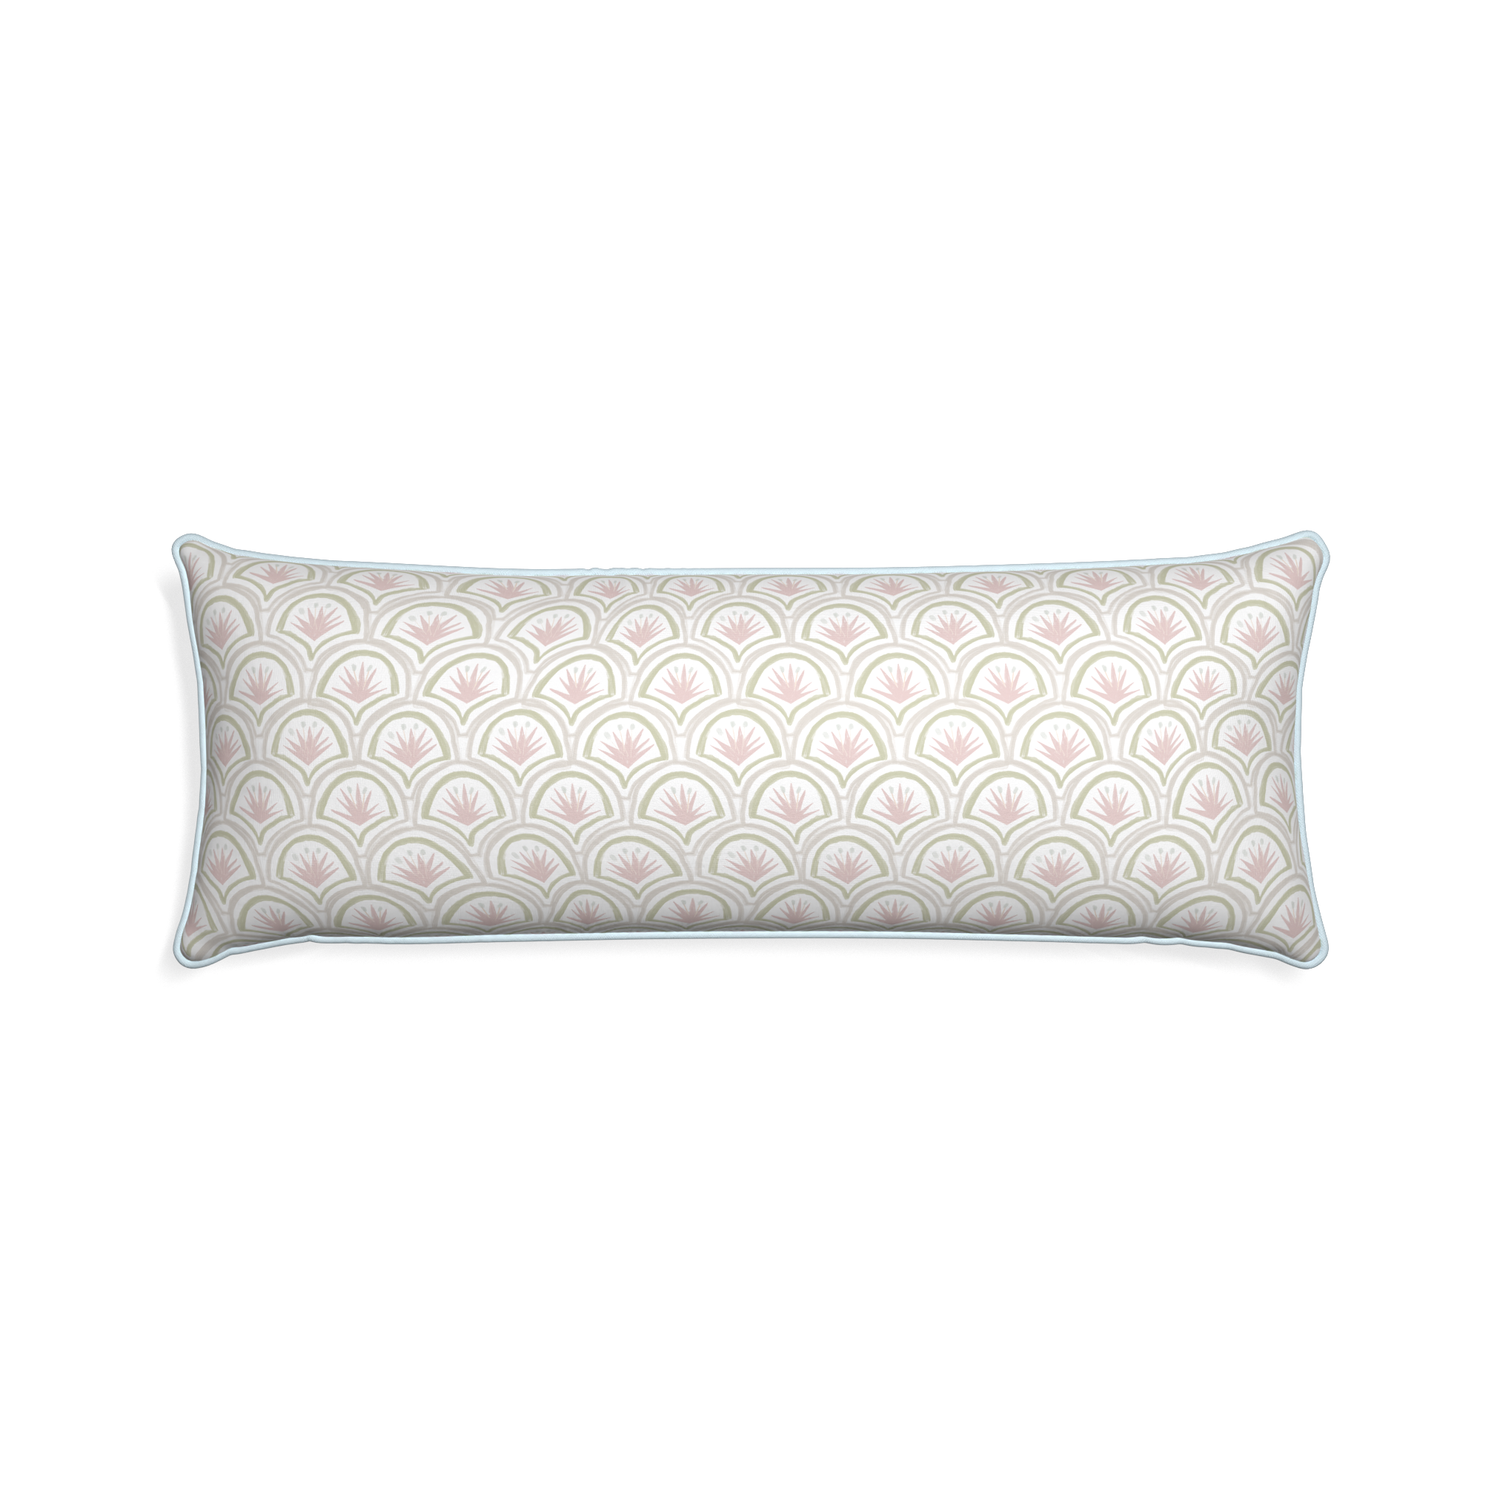 Xl-lumbar thatcher rose custom pillow with powder piping on white background